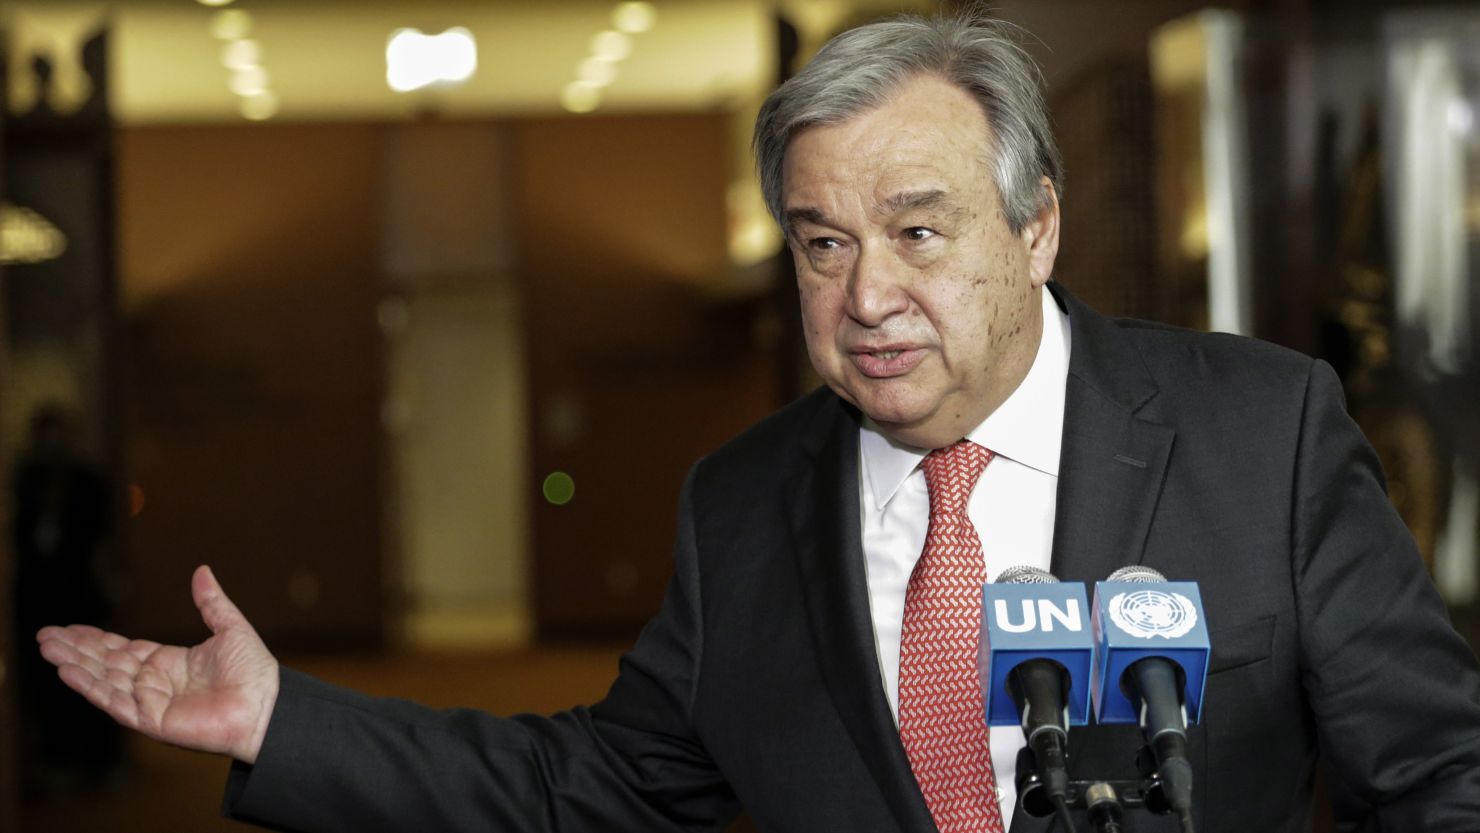 UN Secretary-General Antonio Guterres says he objects to the Trump travel ban and doesn't believe it will stop terrorism.